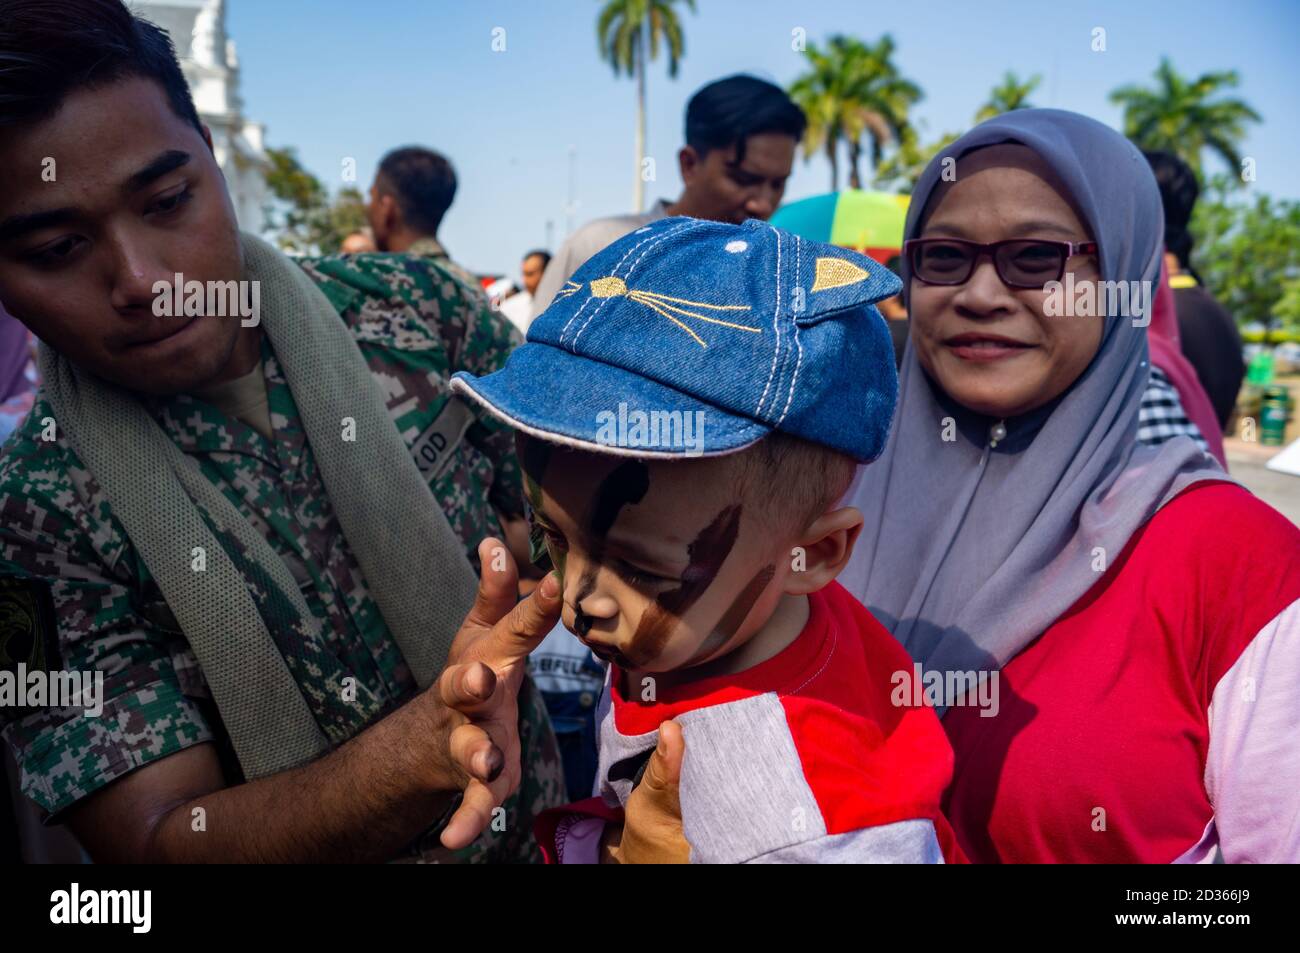 Georgetown, Penang/Malaysia - Feb 29 2020: Unidentified kid get camouflage make-up face paint by Malaysia soldier Stock Photo